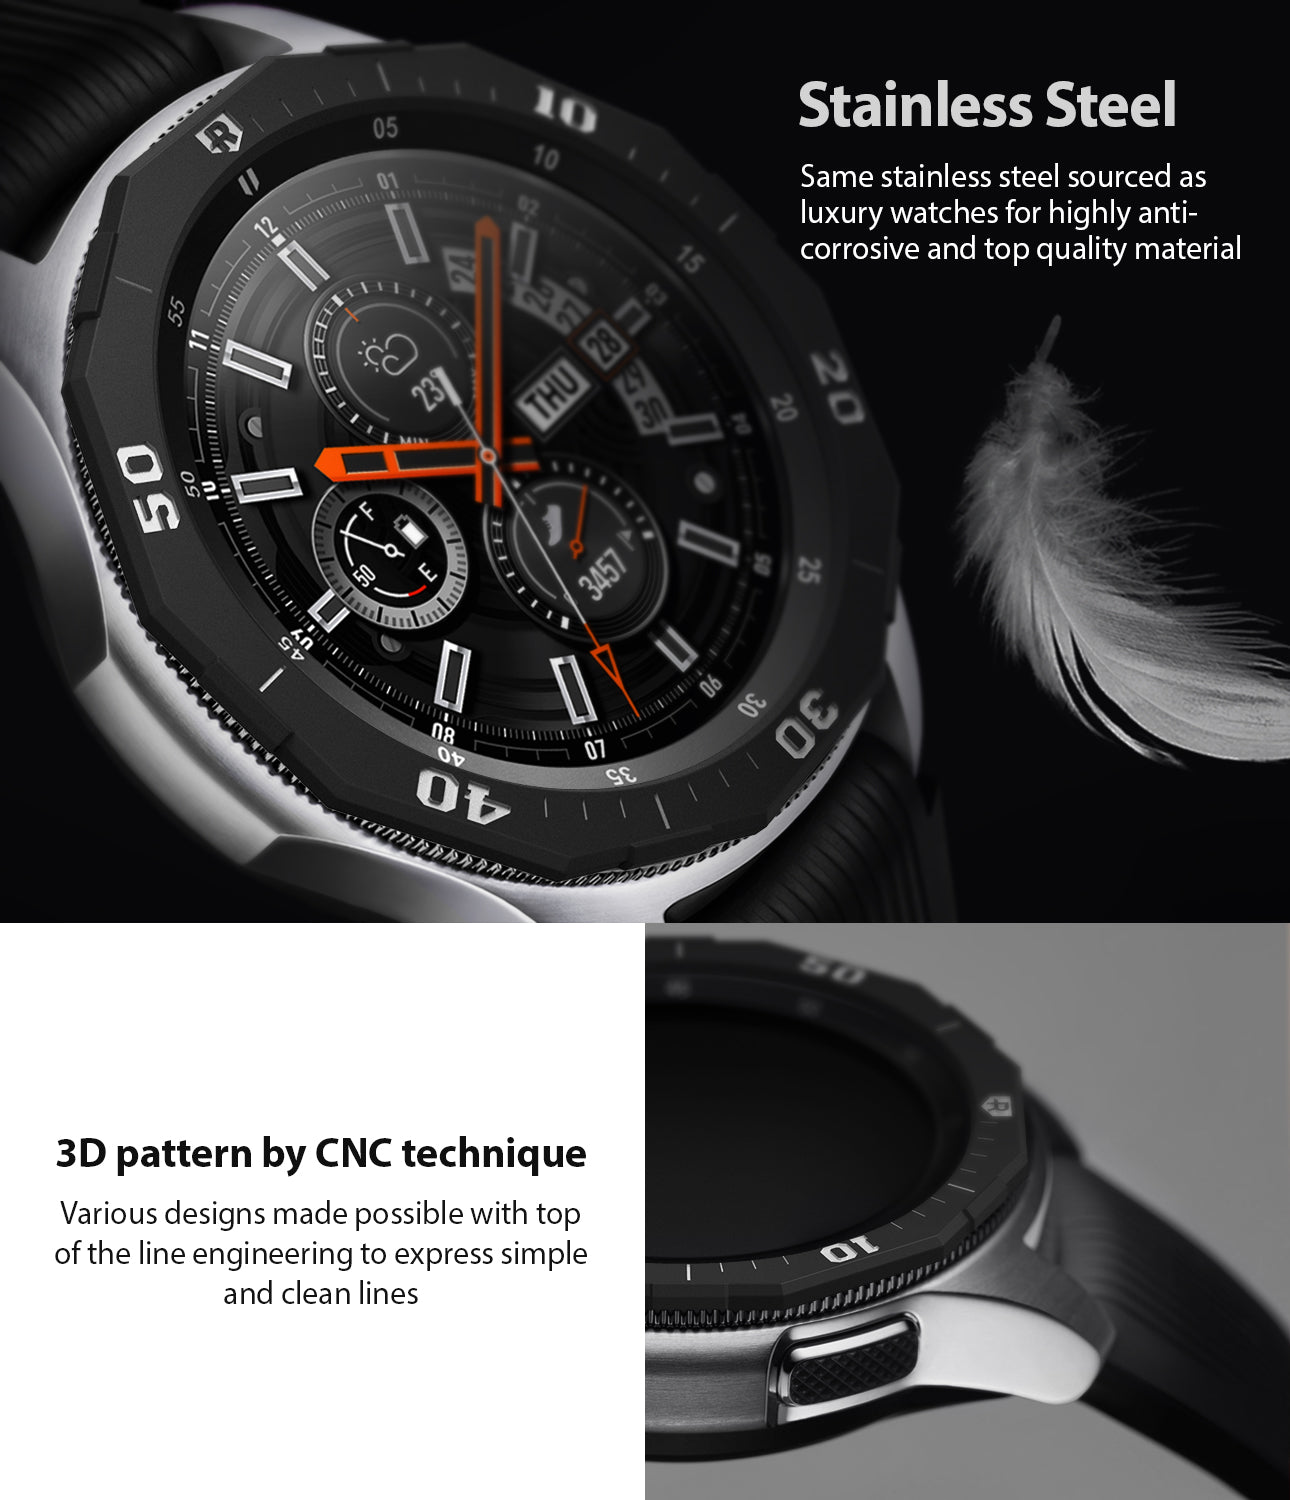 Galaxy Watch 46mm 46-46 - Ringke Official Store